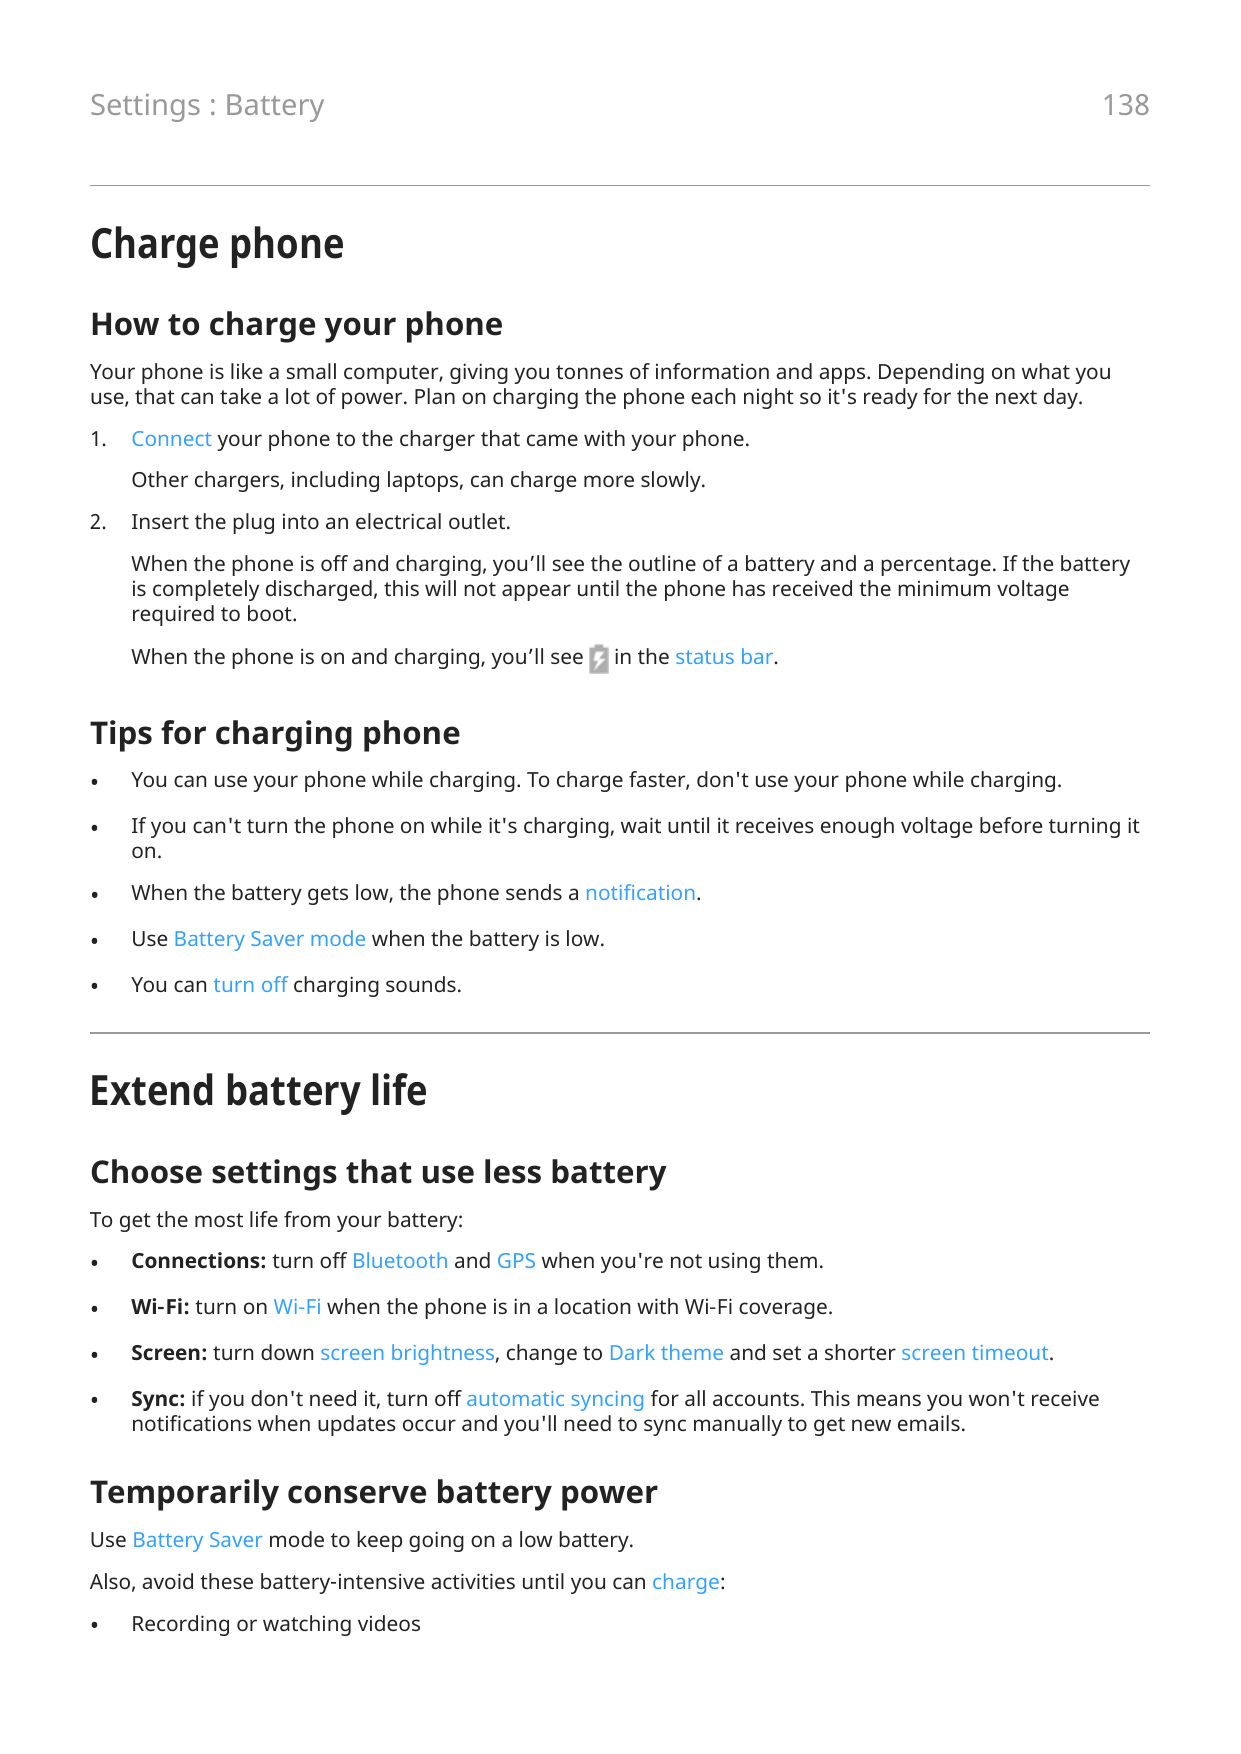 138Settings : BatteryCharge phoneHow to charge your phoneYour phone is like a small computer, giving you tonnes of information a